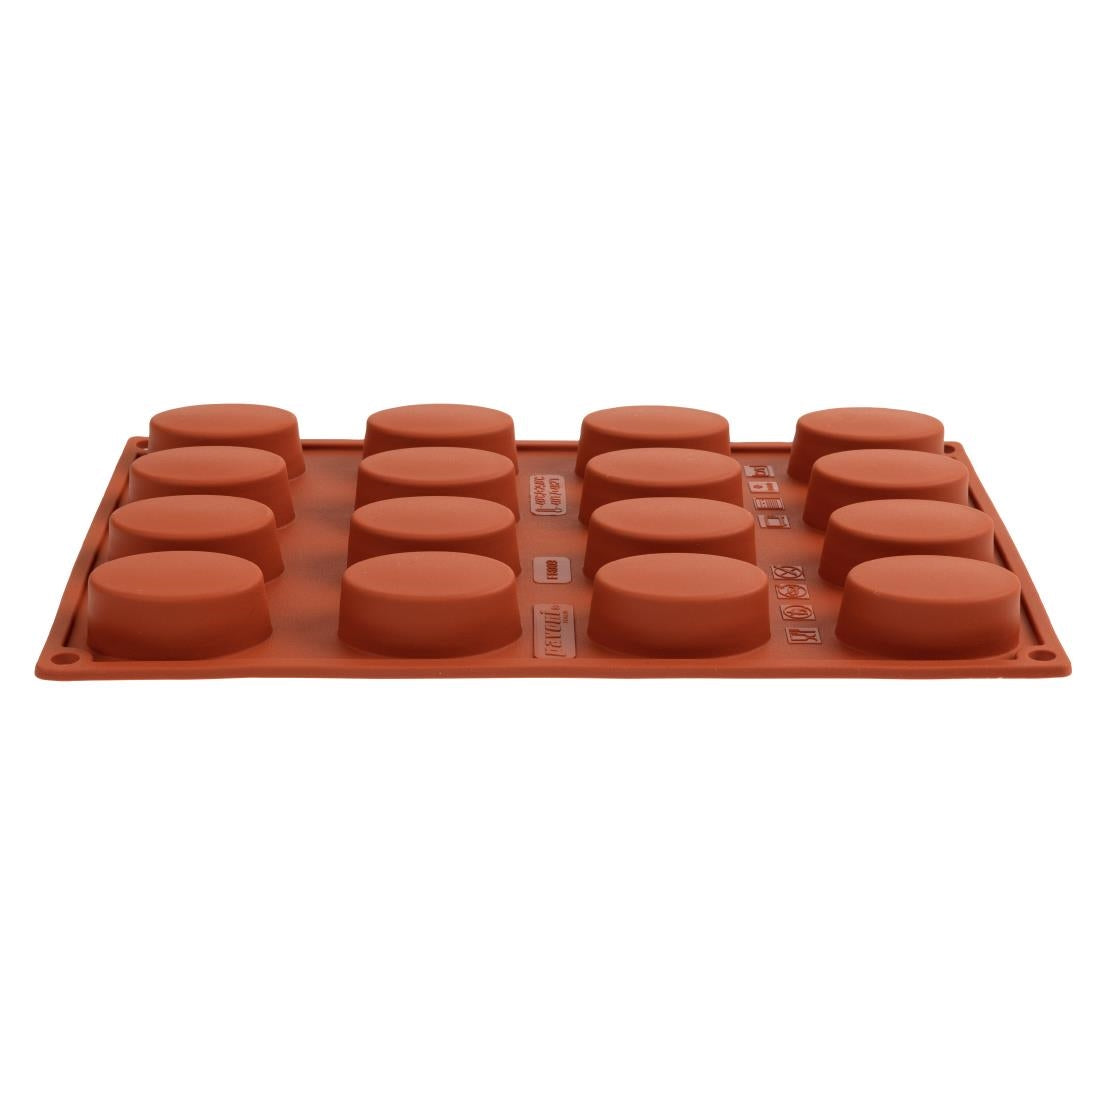 Pavoni Formaflex Silicone Oval Mould 16 Cup